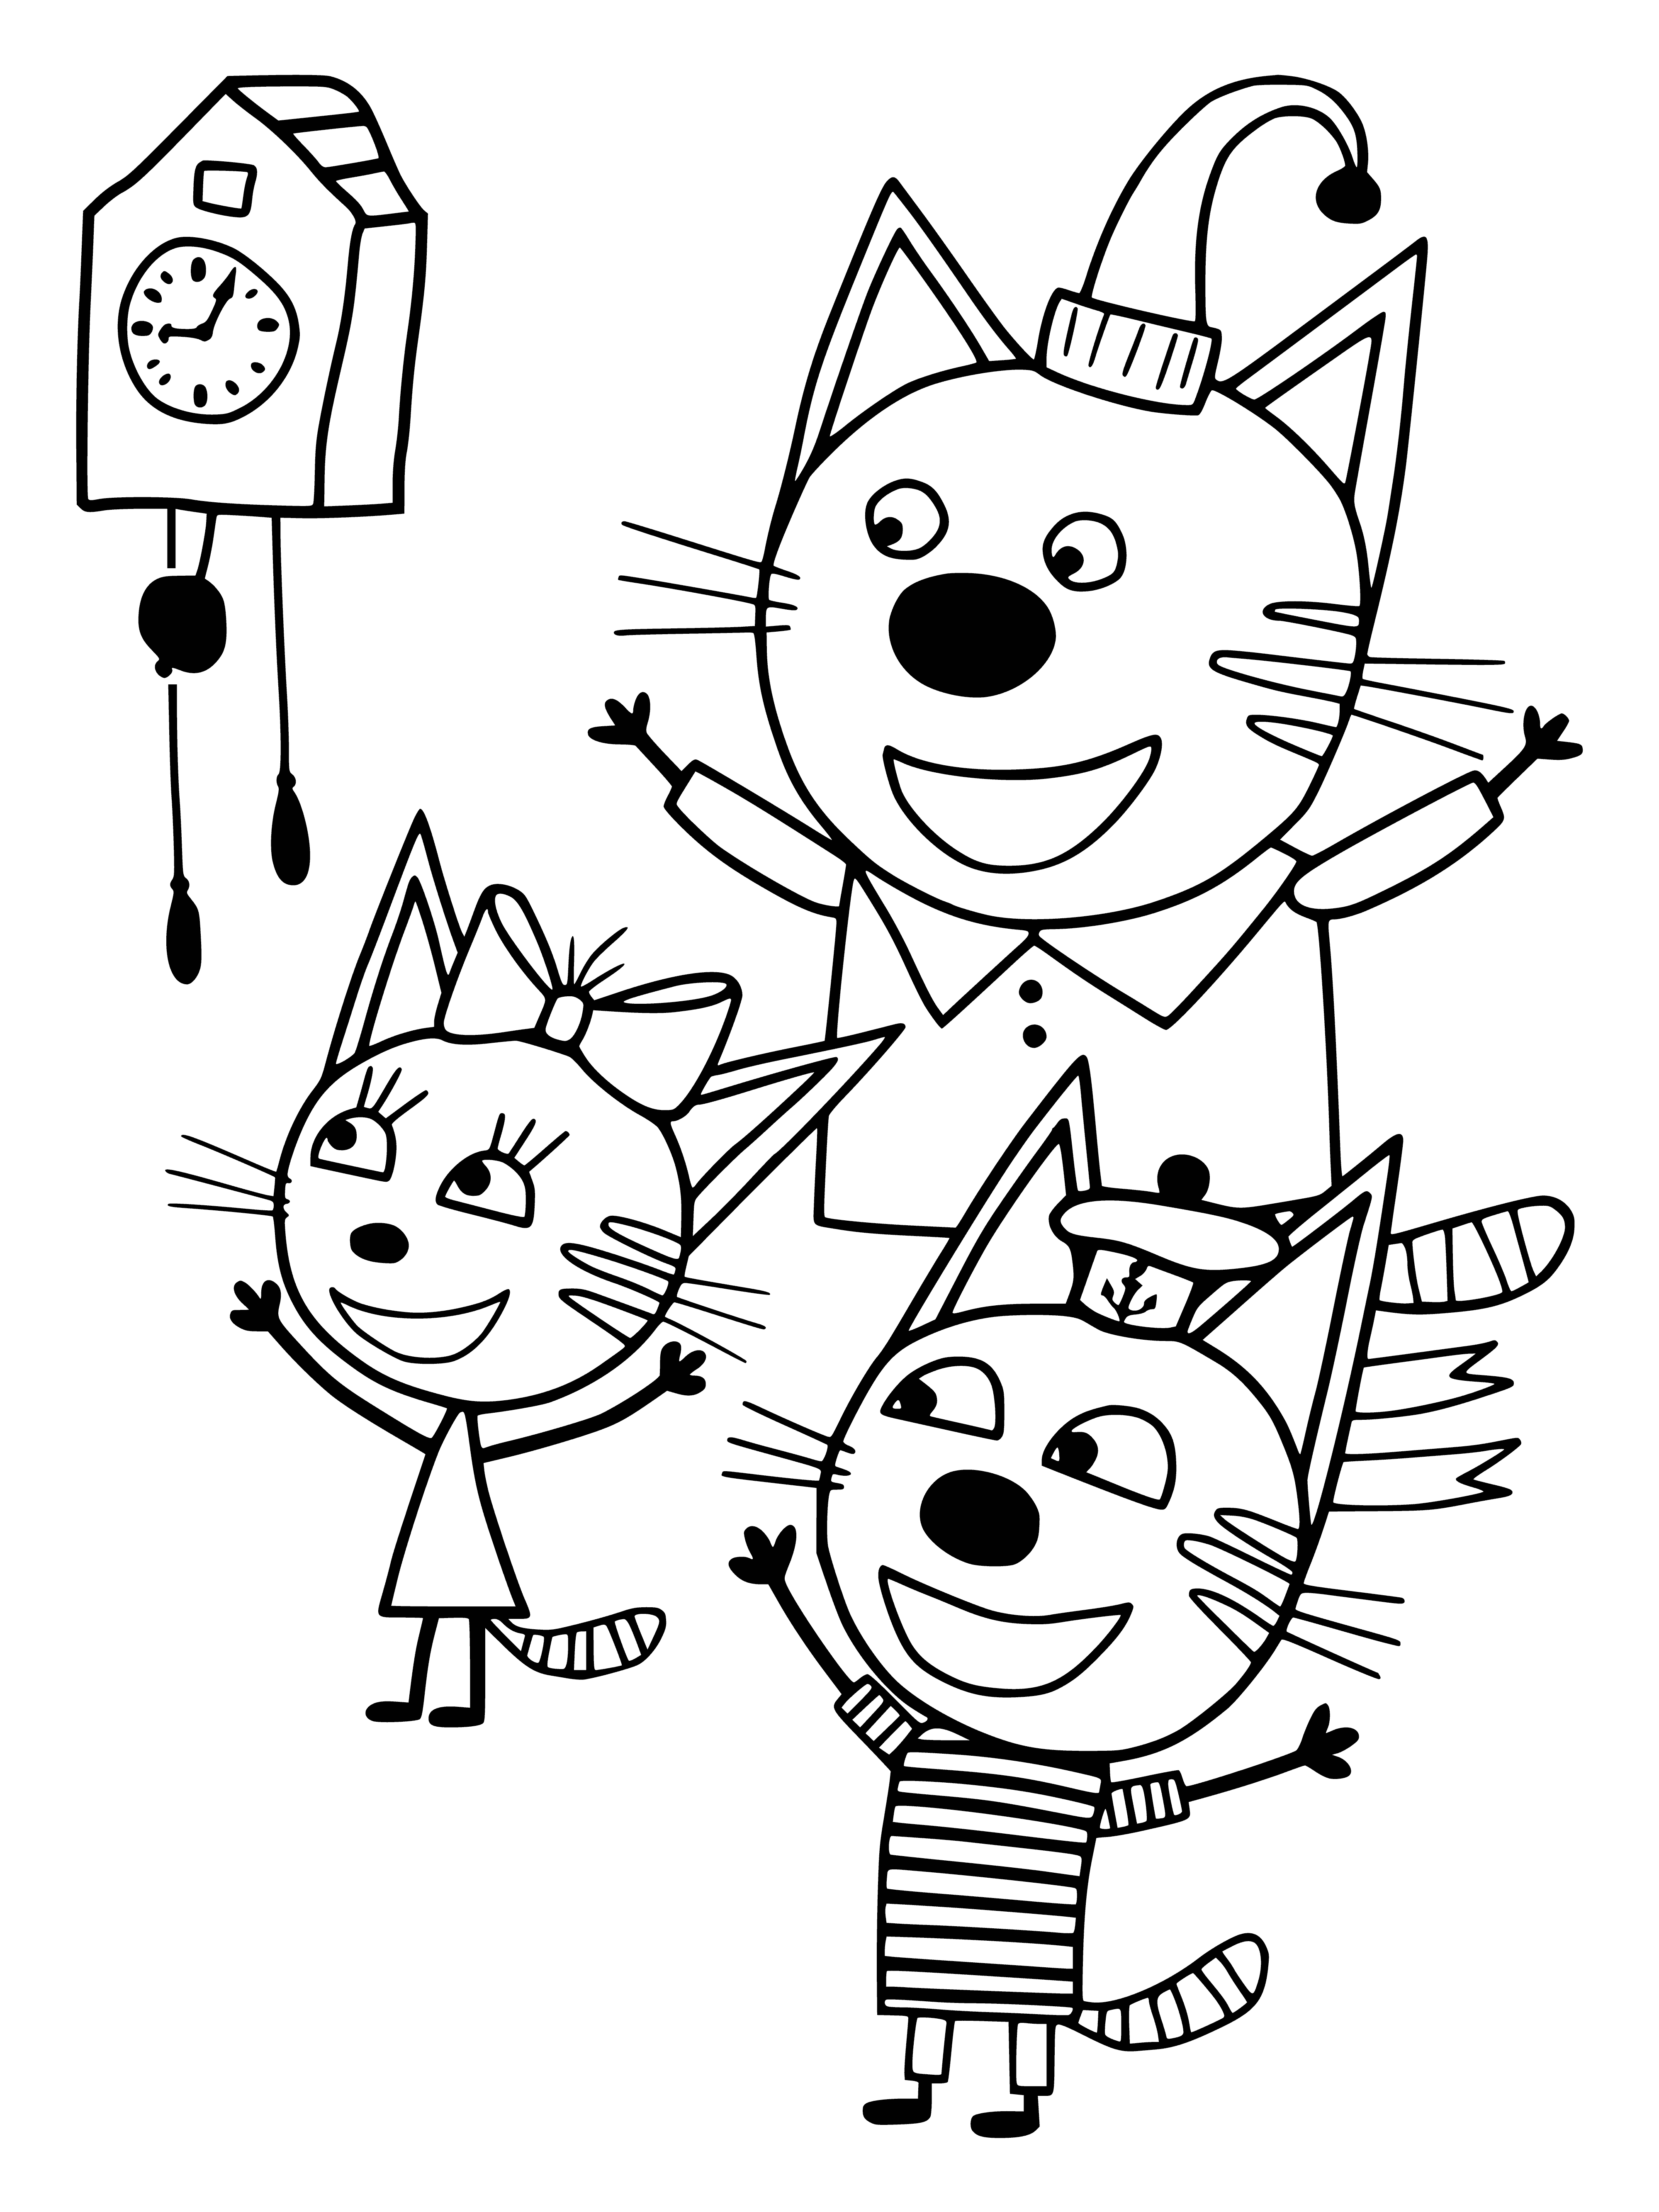 coloring page: 3 cats of diff. colors in coloring page, 2 standing, 1 lying down. All have mouths open & tongues out, looks like they're having fun.